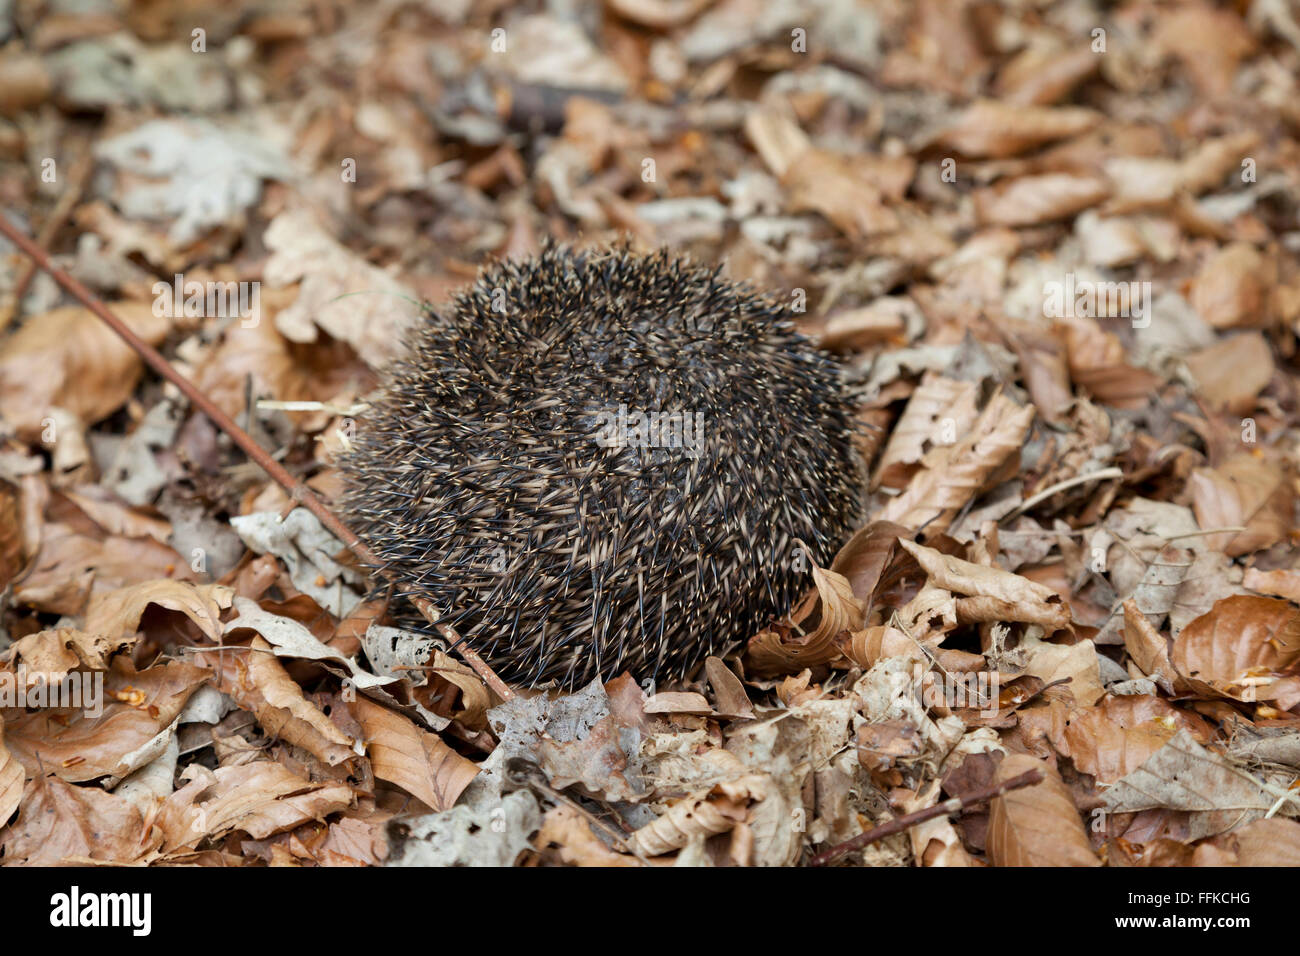 Hedgehog rolled up in autumn leaves Stock Photo